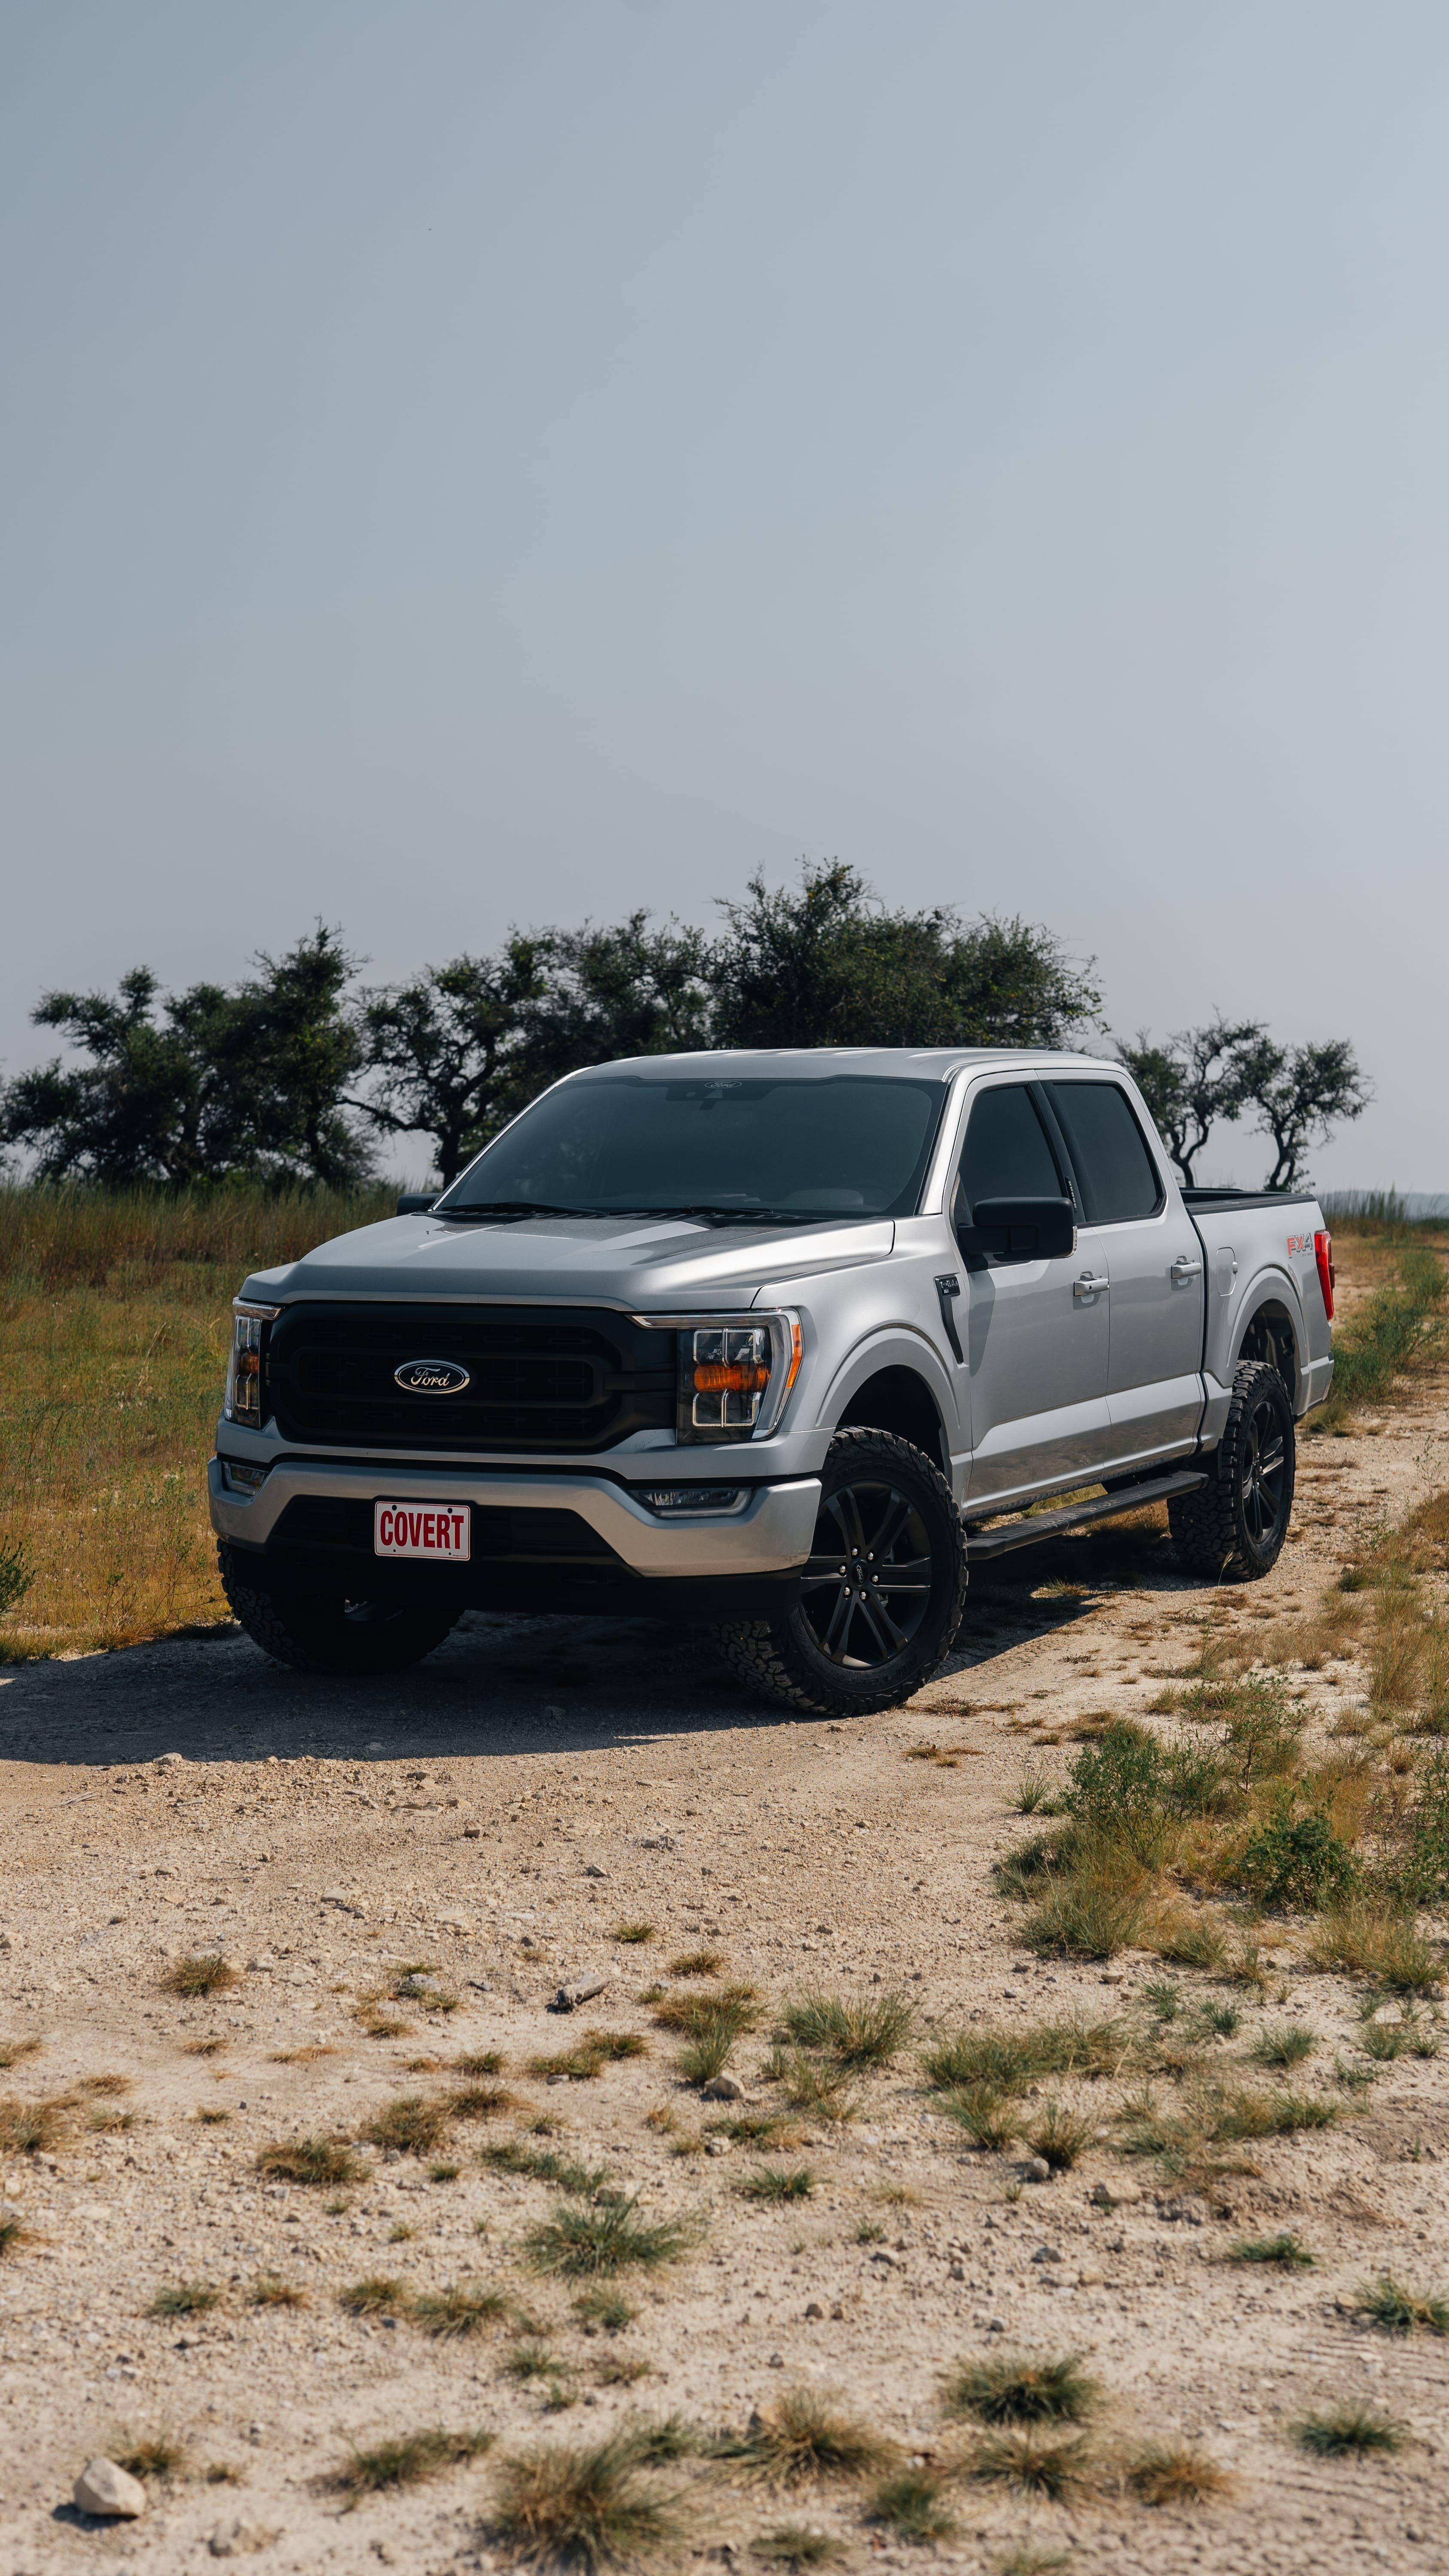 2021 Ford F-150 XLT in Silver with 2" Leveling Kit, BF Goodrich K02 All Terrain Tires